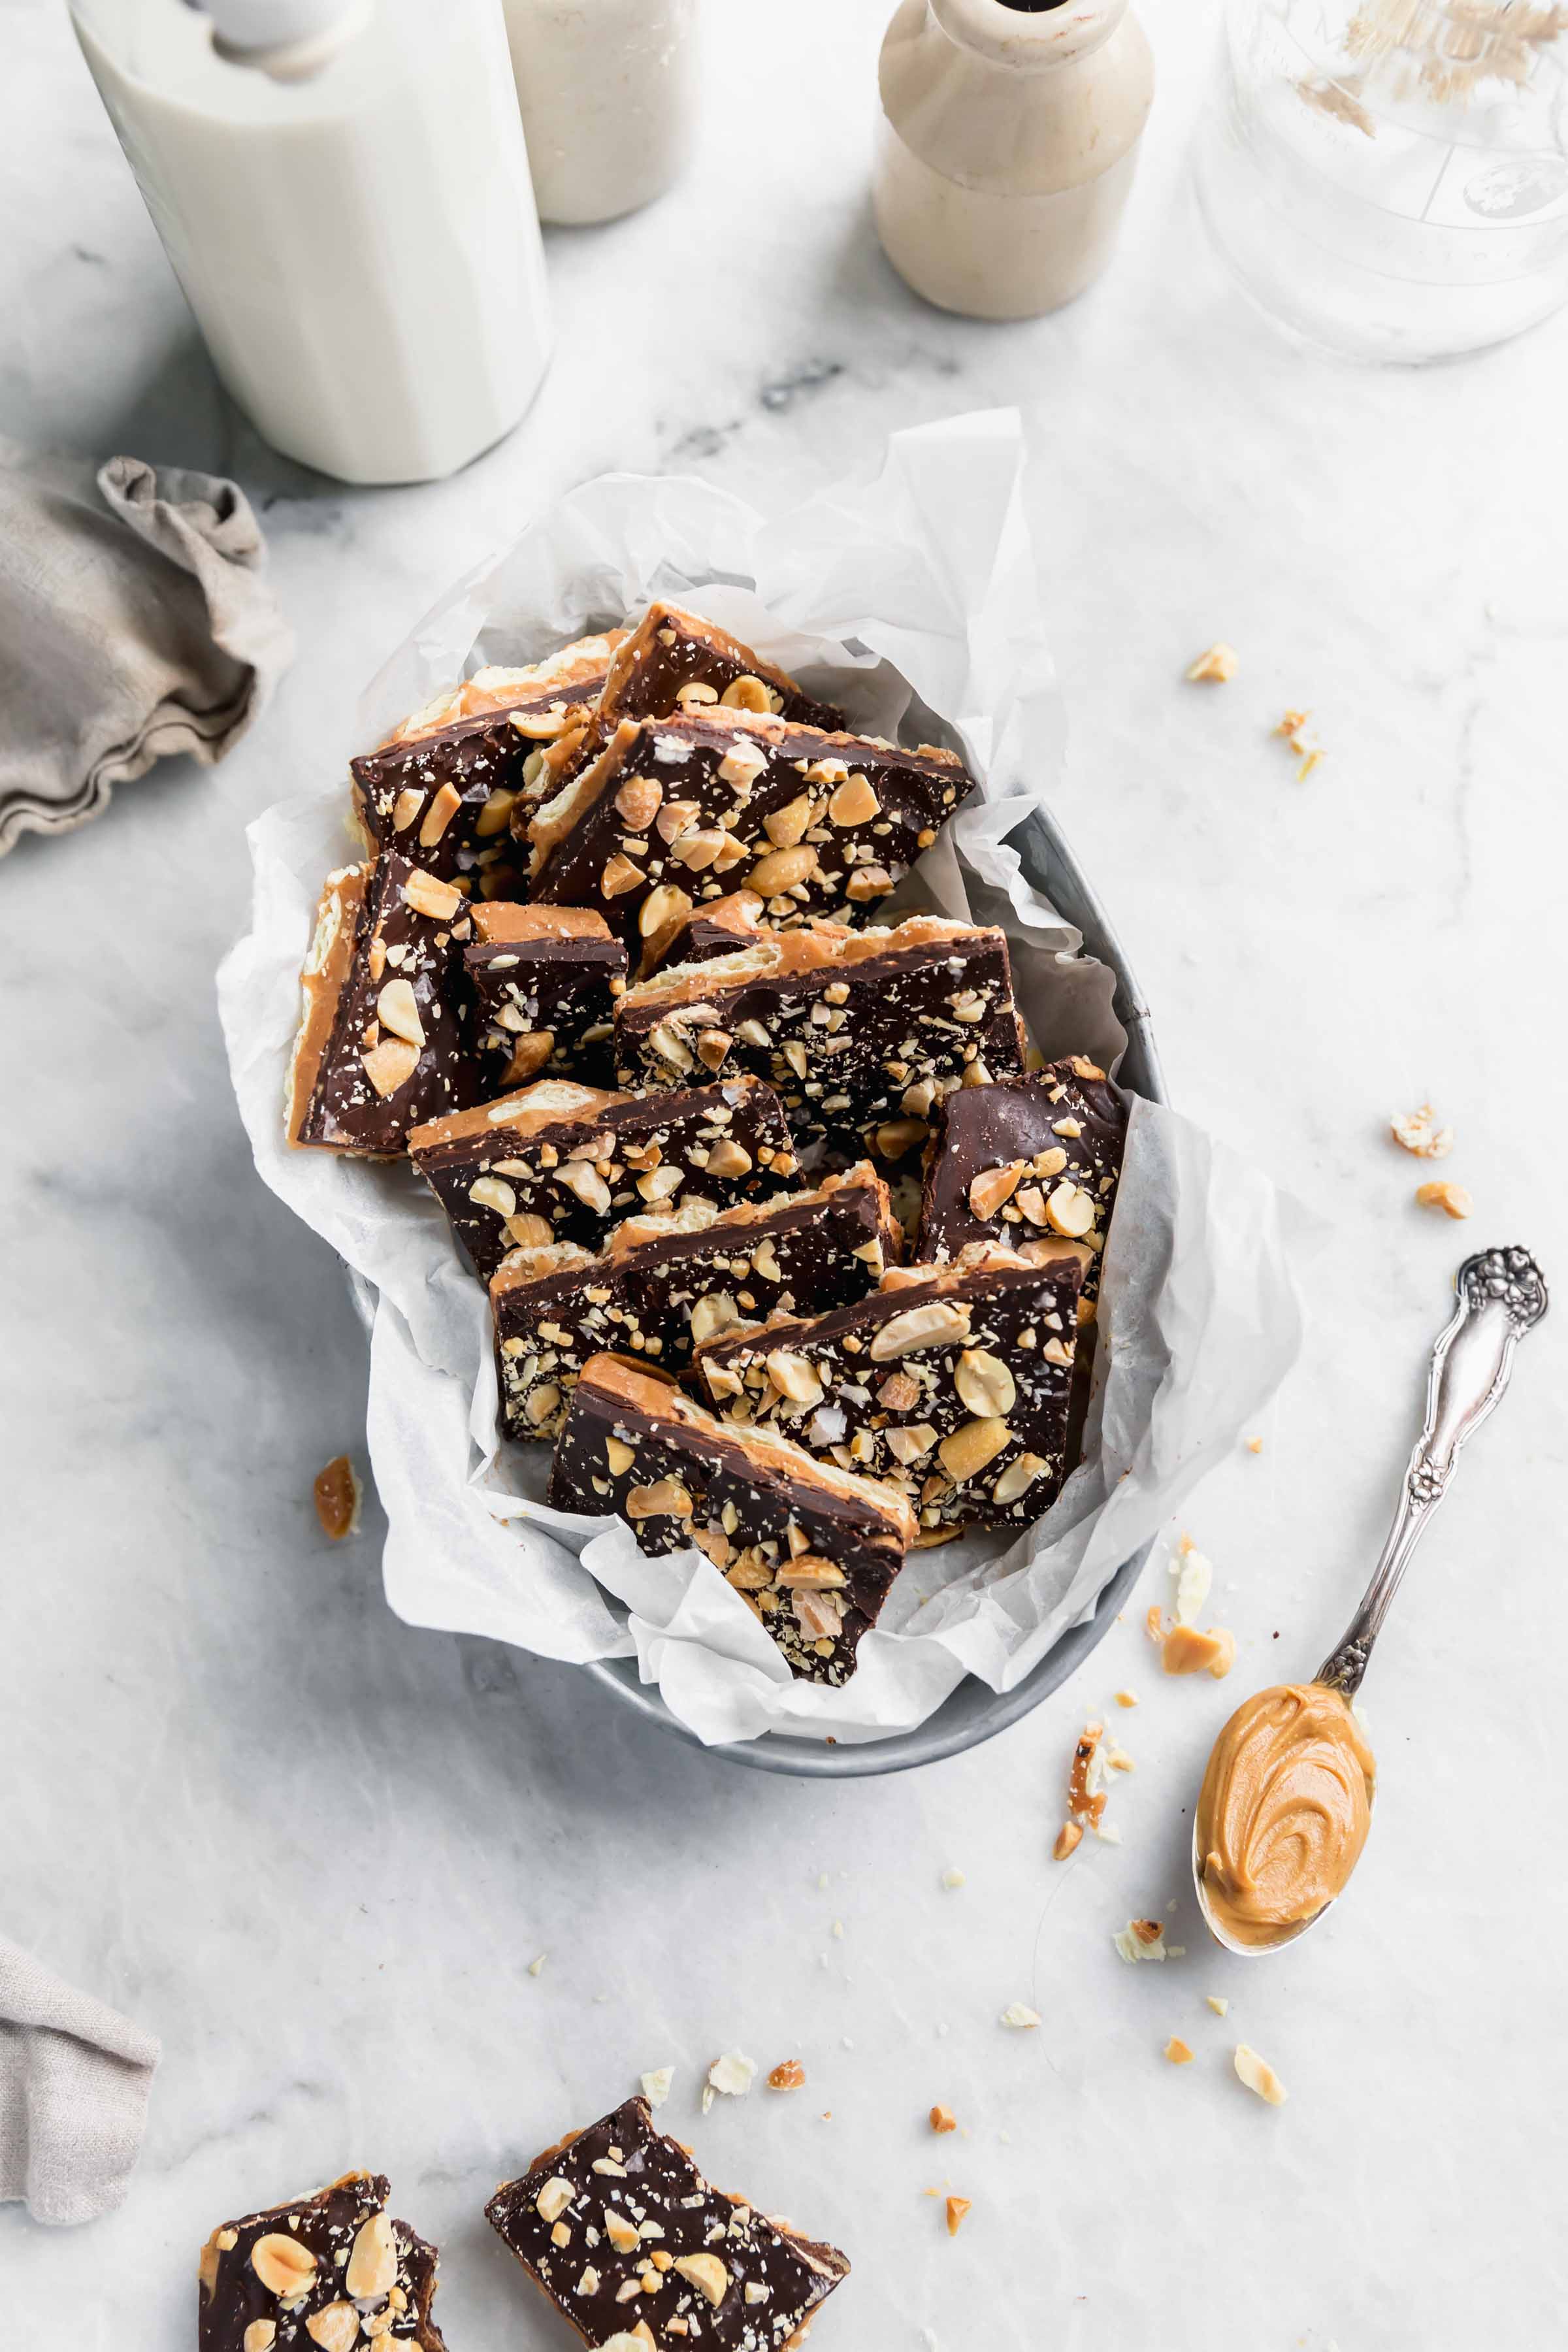 A crowd-pleasing sweet, salty, crunchy, and smooth Peanut Butter Toffee bark made entirely with ingredients you probably already have in your pantry! Hello, sweet thing!